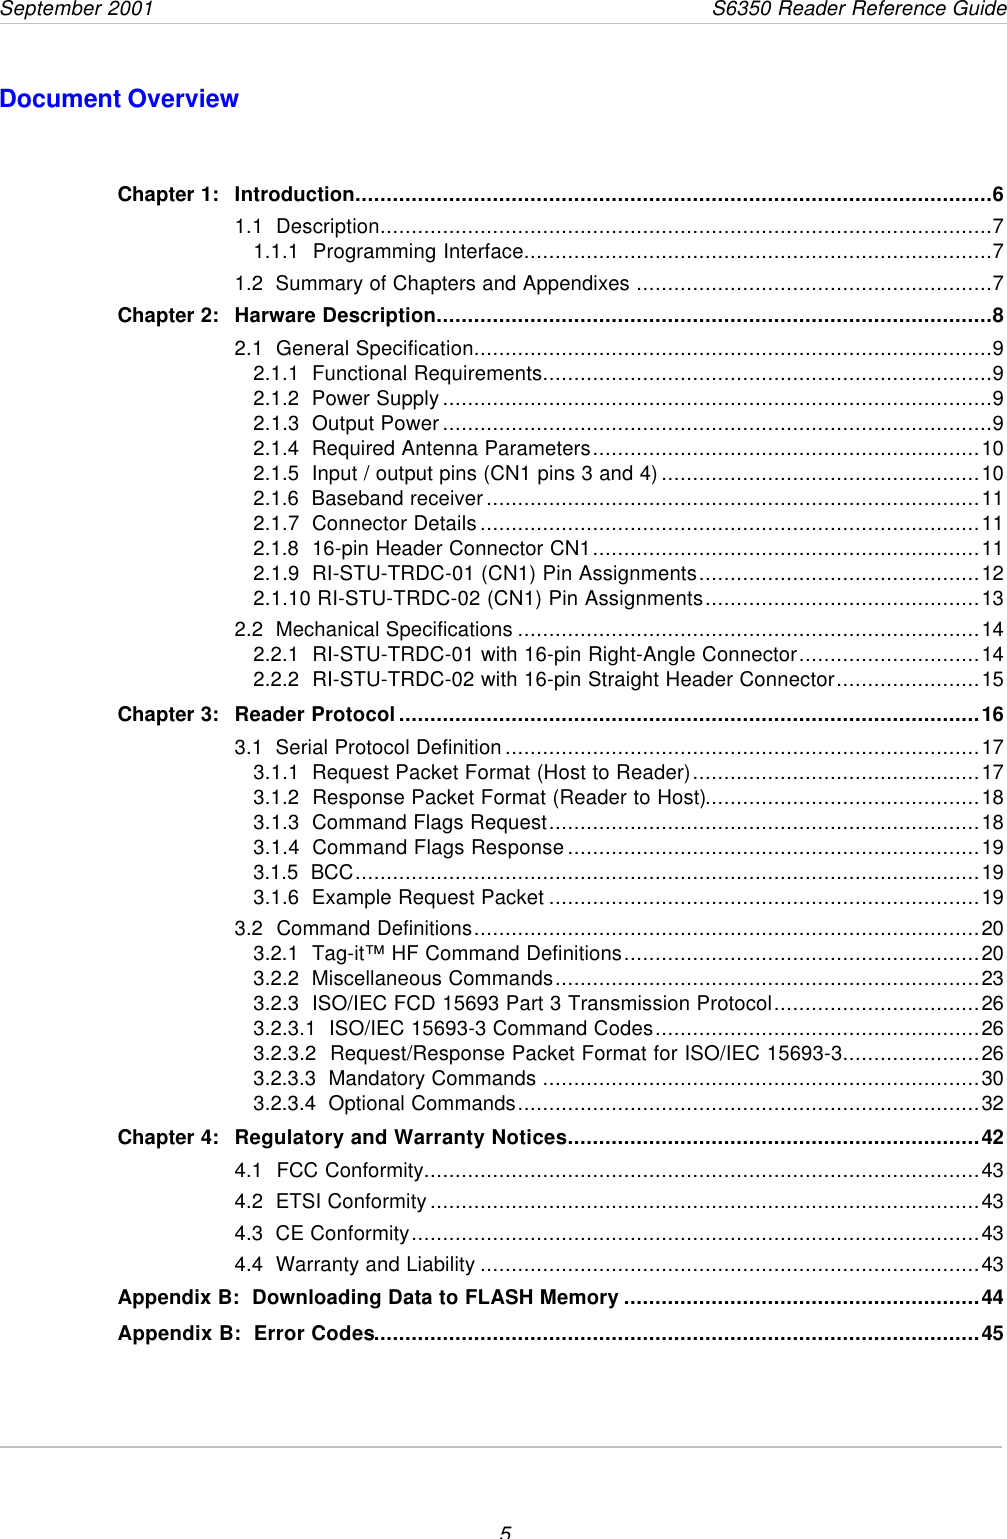 September 2001       S6350 Reader Reference Guide5Document OverviewChapter 1: Introduction......................................................................................................61.1  Description..................................................................................................71.1.1  Programming Interface...........................................................................71.2  Summary of Chapters and Appendixes .........................................................7Chapter 2: Harware Description.........................................................................................82.1  General Specification...................................................................................92.1.1  Functional Requirements........................................................................92.1.2  Power Supply........................................................................................92.1.3  Output Power........................................................................................92.1.4  Required Antenna Parameters..............................................................102.1.5  Input / output pins (CN1 pins 3 and 4)...................................................102.1.6  Baseband receiver...............................................................................112.1.7  Connector Details................................................................................112.1.8  16-pin Header Connector CN1..............................................................112.1.9  RI-STU-TRDC-01 (CN1) Pin Assignments.............................................122.1.10 RI-STU-TRDC-02 (CN1) Pin Assignments............................................132.2  Mechanical Specifications ..........................................................................142.2.1  RI-STU-TRDC-01 with 16-pin Right-Angle Connector.............................142.2.2  RI-STU-TRDC-02 with 16-pin Straight Header Connector.......................15Chapter 3: Reader Protocol.............................................................................................163.1  Serial Protocol Definition............................................................................173.1.1  Request Packet Format (Host to Reader)..............................................173.1.2  Response Packet Format (Reader to Host)............................................183.1.3  Command Flags Request.....................................................................183.1.4  Command Flags Response..................................................................193.1.5  BCC....................................................................................................193.1.6  Example Request Packet .....................................................................193.2  Command Definitions.................................................................................203.2.1  Tag-it™ HF Command Definitions.........................................................203.2.2  Miscellaneous Commands....................................................................233.2.3  ISO/IEC FCD 15693 Part 3 Transmission Protocol.................................263.2.3.1  ISO/IEC 15693-3 Command Codes....................................................263.2.3.2  Request/Response Packet Format for ISO/IEC 15693-3......................263.2.3.3  Mandatory Commands ......................................................................303.2.3.4  Optional Commands..........................................................................32Chapter 4: Regulatory and Warranty Notices..................................................................424.1  FCC Conformity.........................................................................................434.2  ETSI Conformity........................................................................................434.3  CE Conformity...........................................................................................434.4  Warranty and Liability ................................................................................43Appendix B:  Downloading Data to FLASH Memory .........................................................44Appendix B:  Error Codes.................................................................................................45